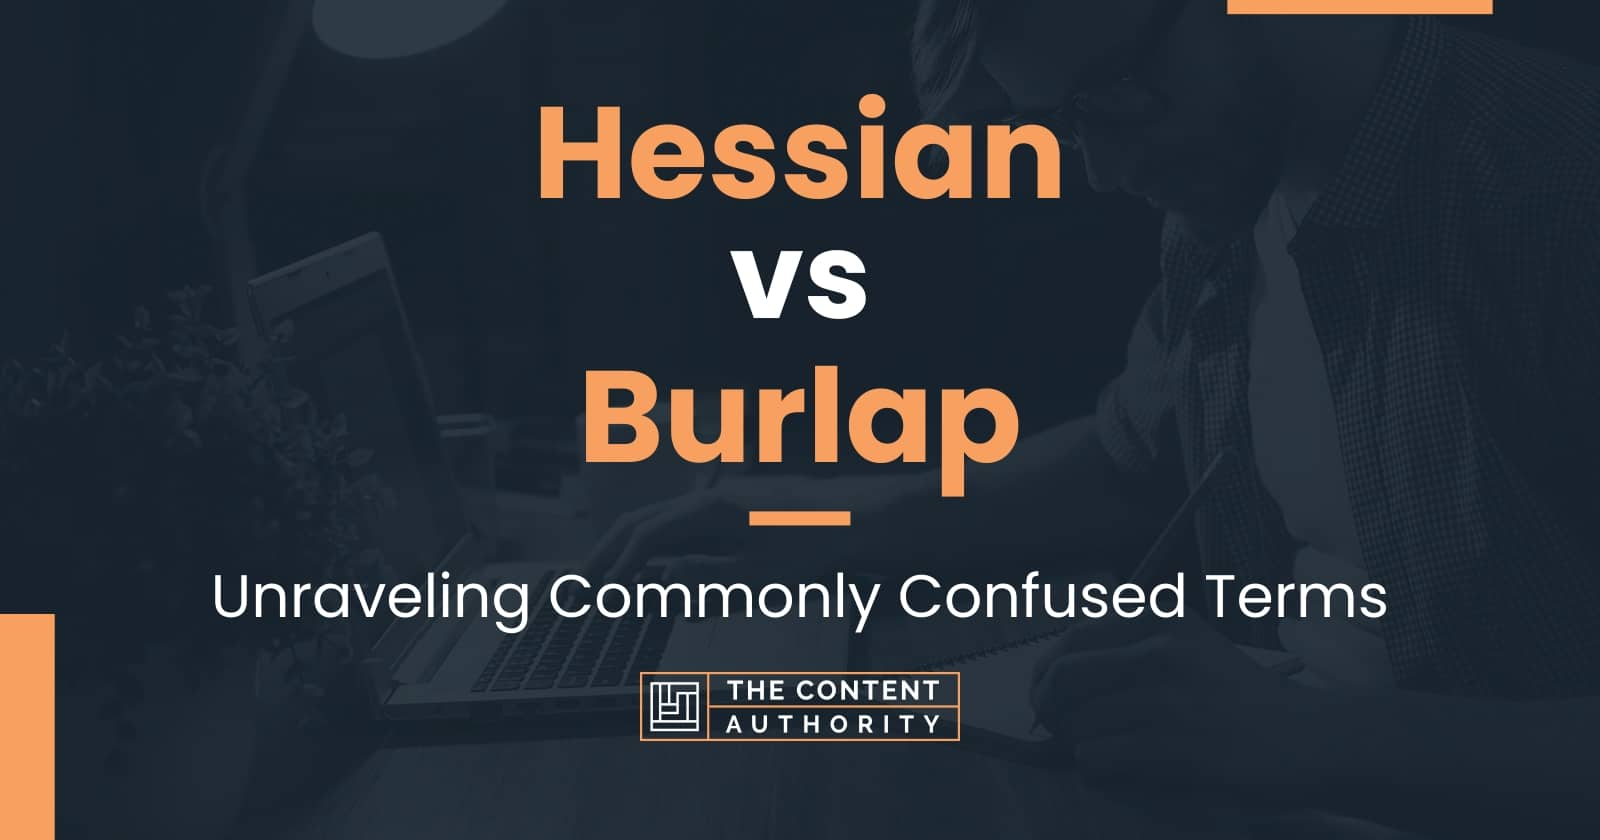 Hessian vs Burlap: Unraveling Commonly Confused Terms